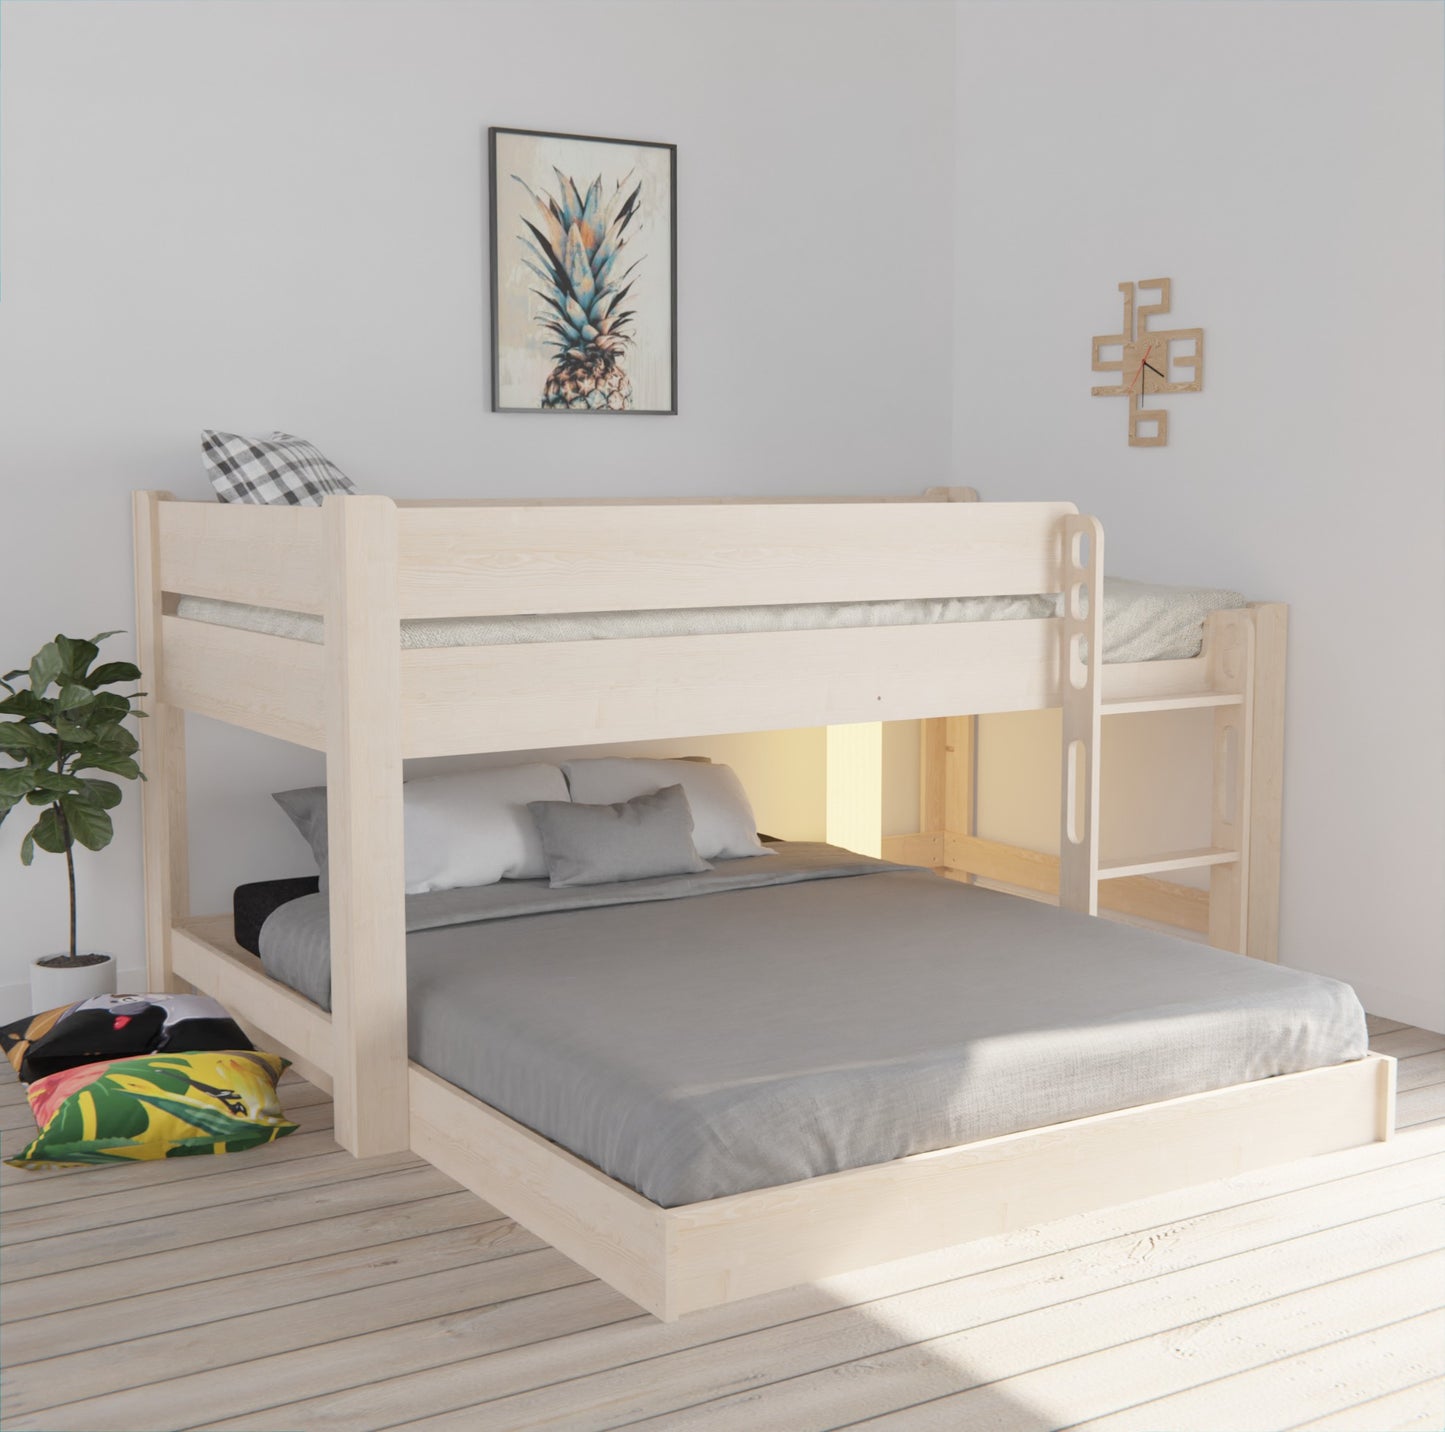 Discover the perfect space-saving solution with our wooden L-shaped bunk beds. Crafted for durability and style, ideal for families.